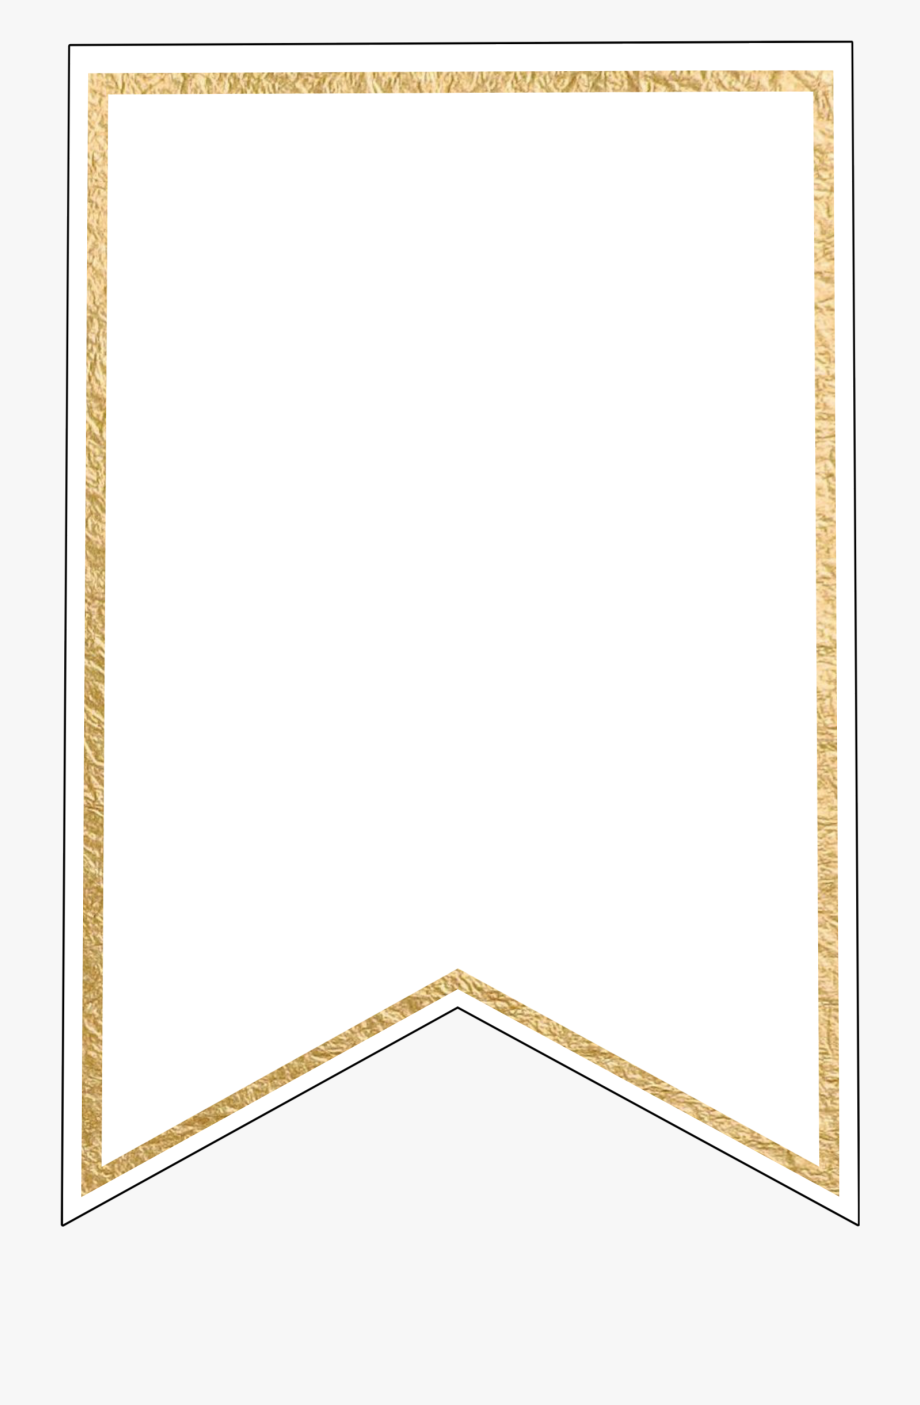 Pennant Banner Template.